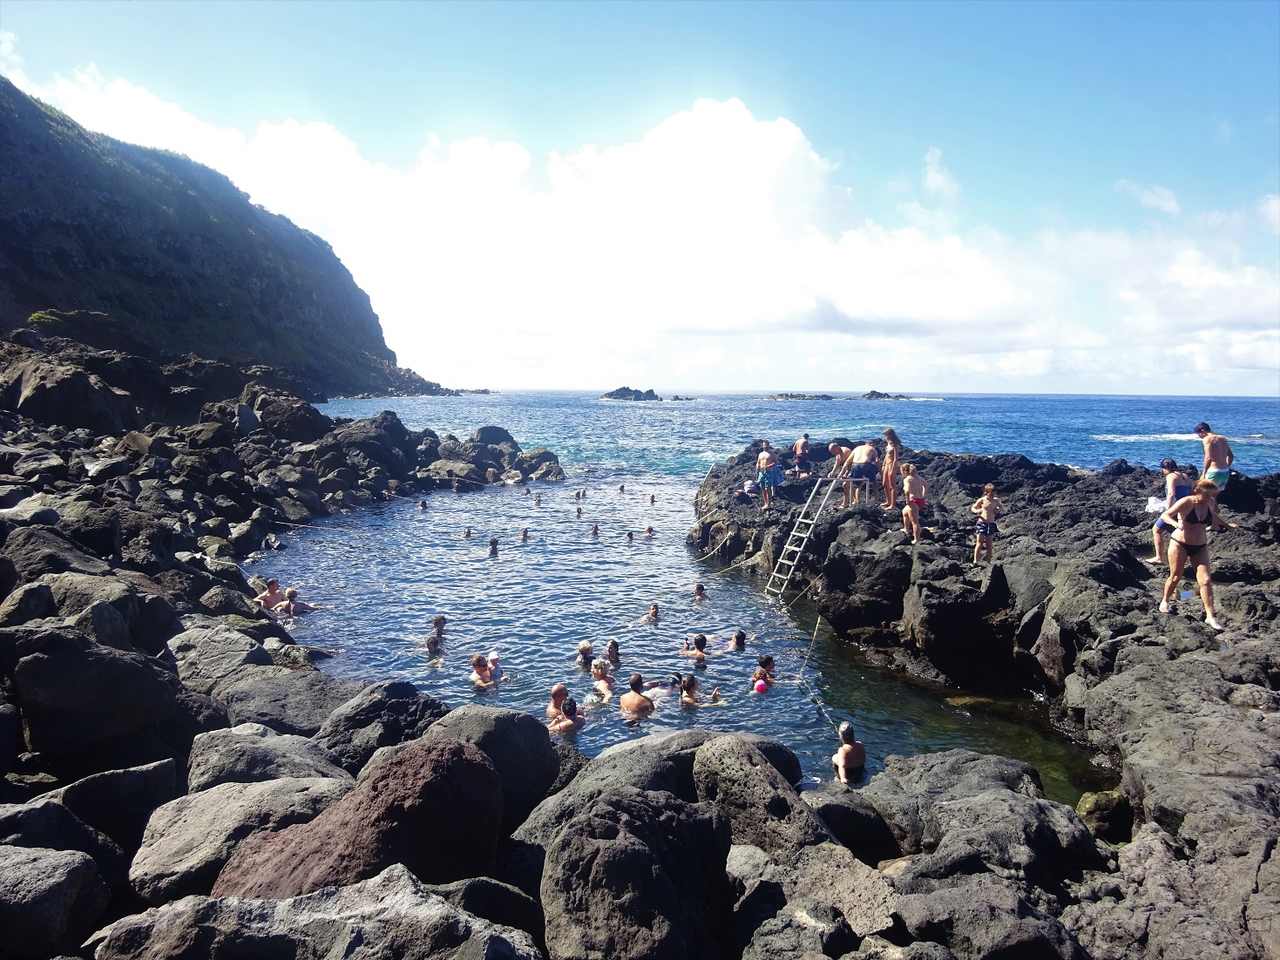 Swimming in geothermal waters